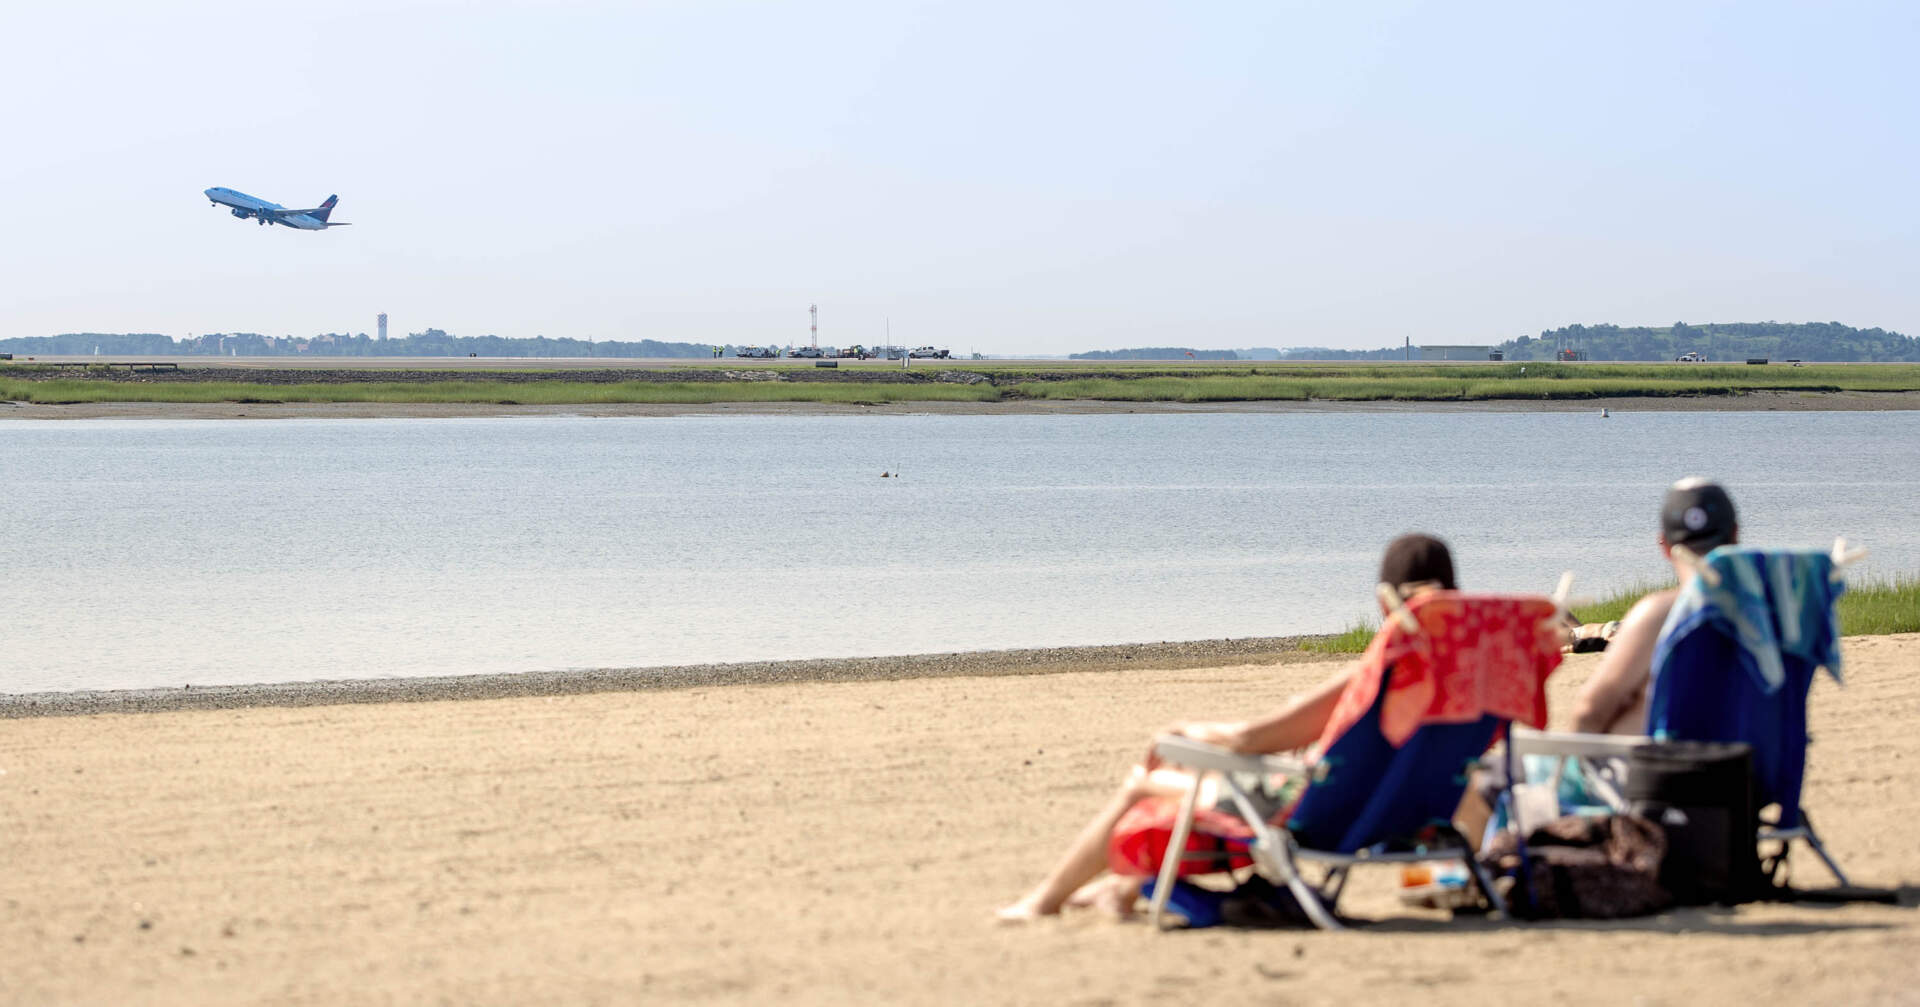 Beachgoers enjoy the sunshine on Constitution Beach in East Boston, as a plane takes off from Logan Airport. (Robin Lubbock/WBUR)